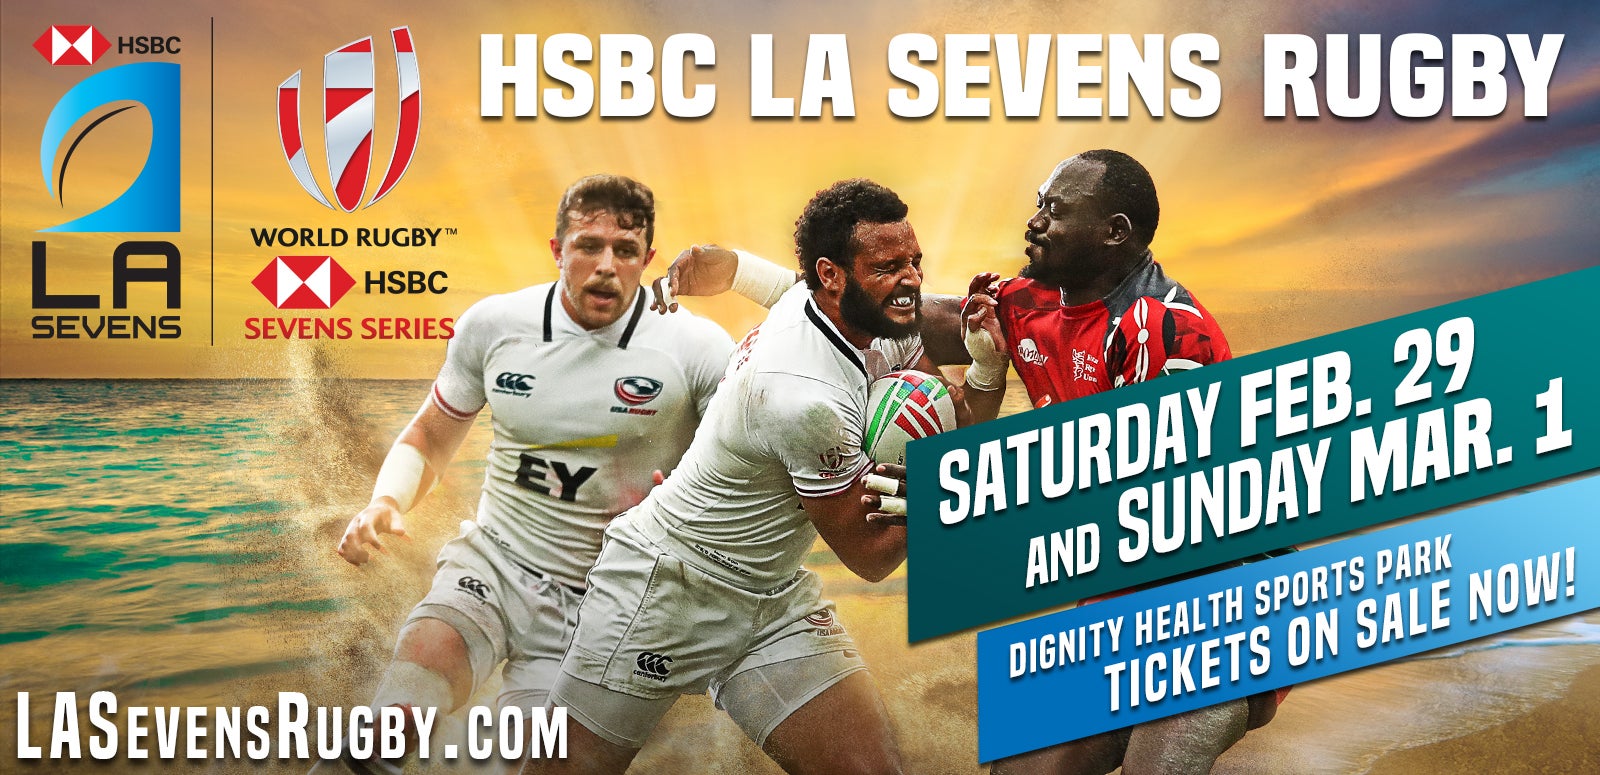 Tickets Go On Sale Today for HSBC LA Sevens